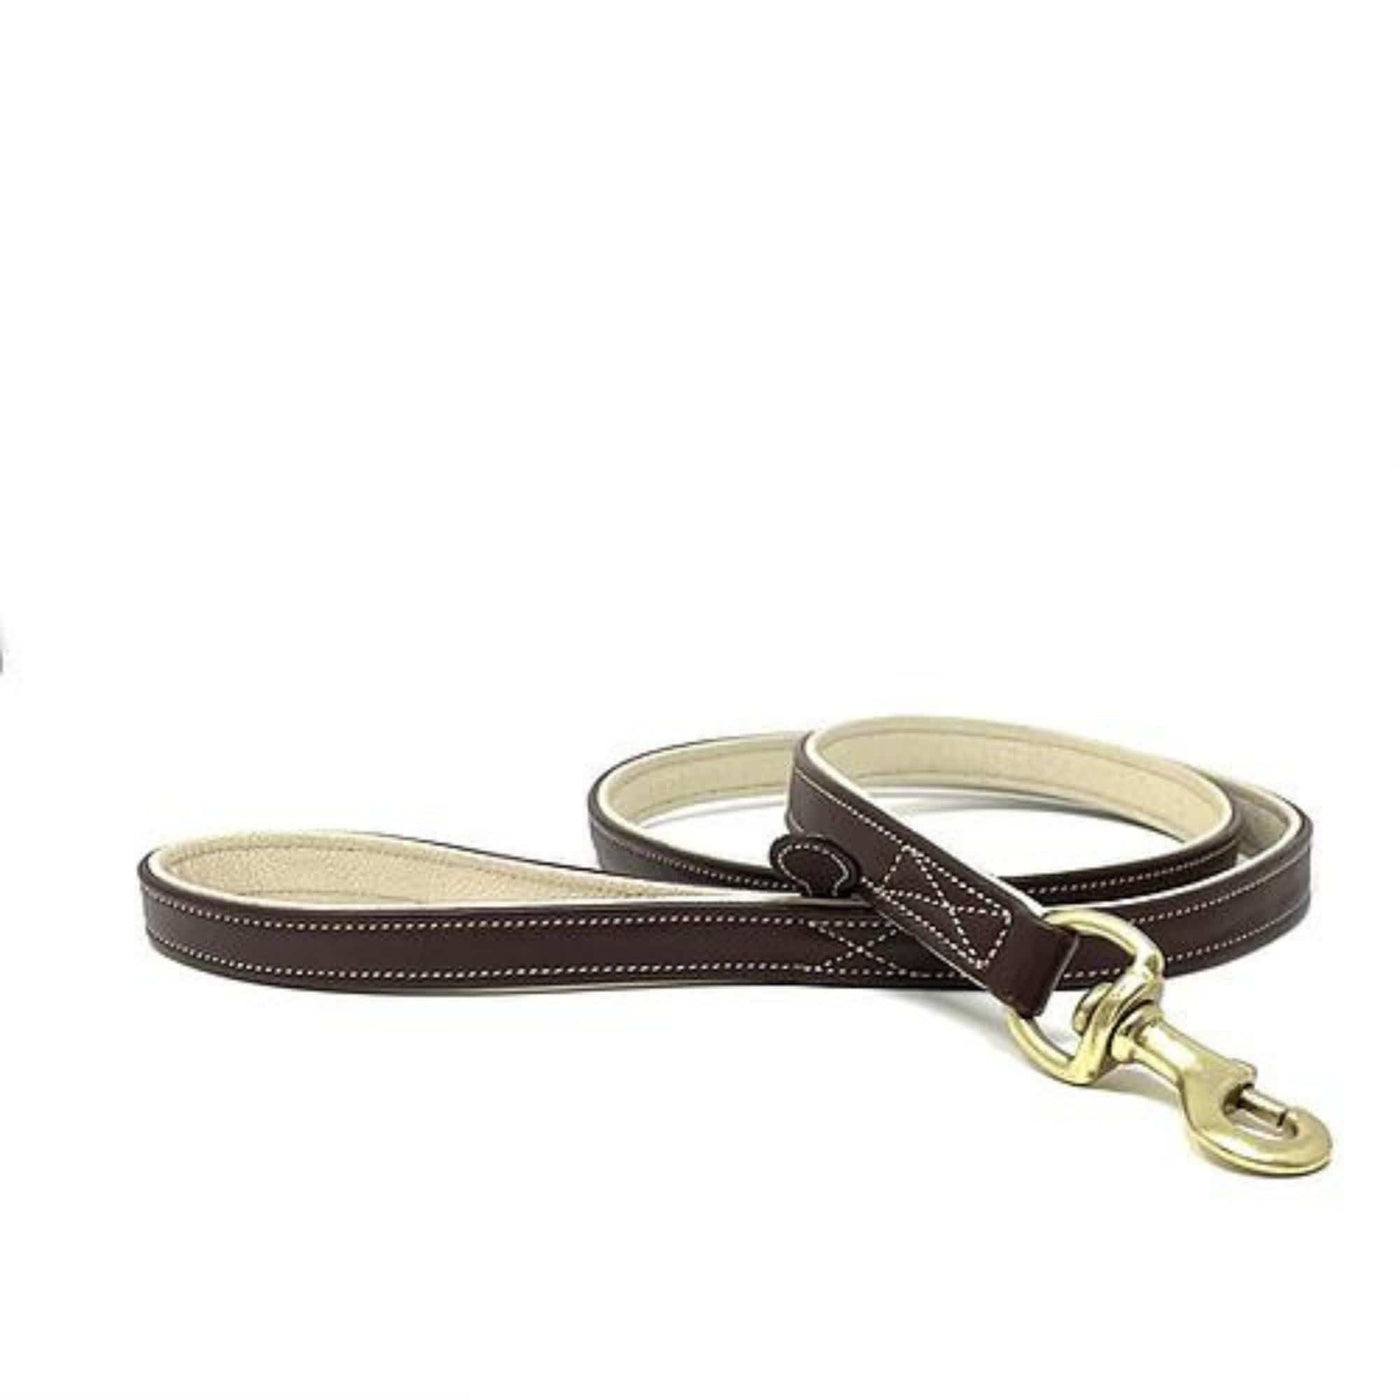 CLIFF Home Luxury Leather Dog Lead in Tan & Cream